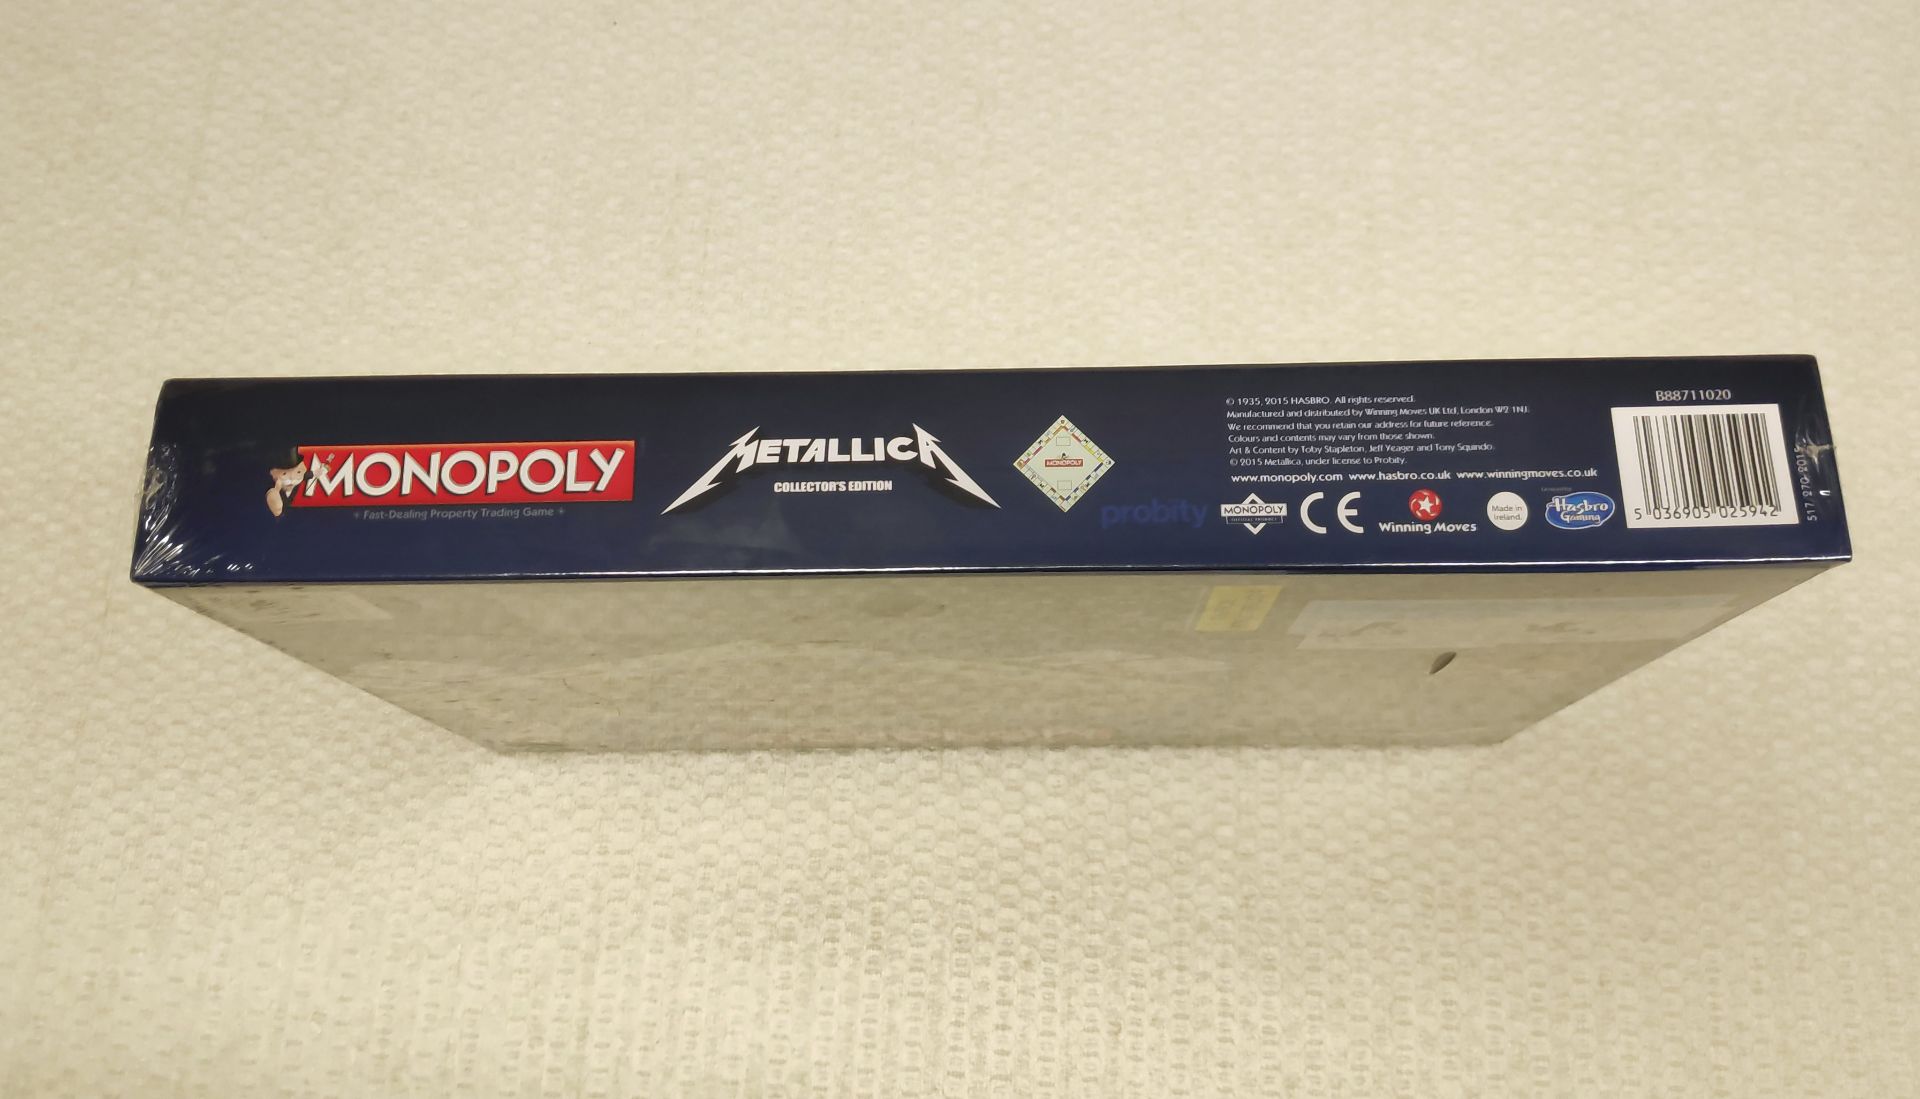 1 x Metallica Collector's Edition Monopoly - New/Sealed - Image 8 of 8